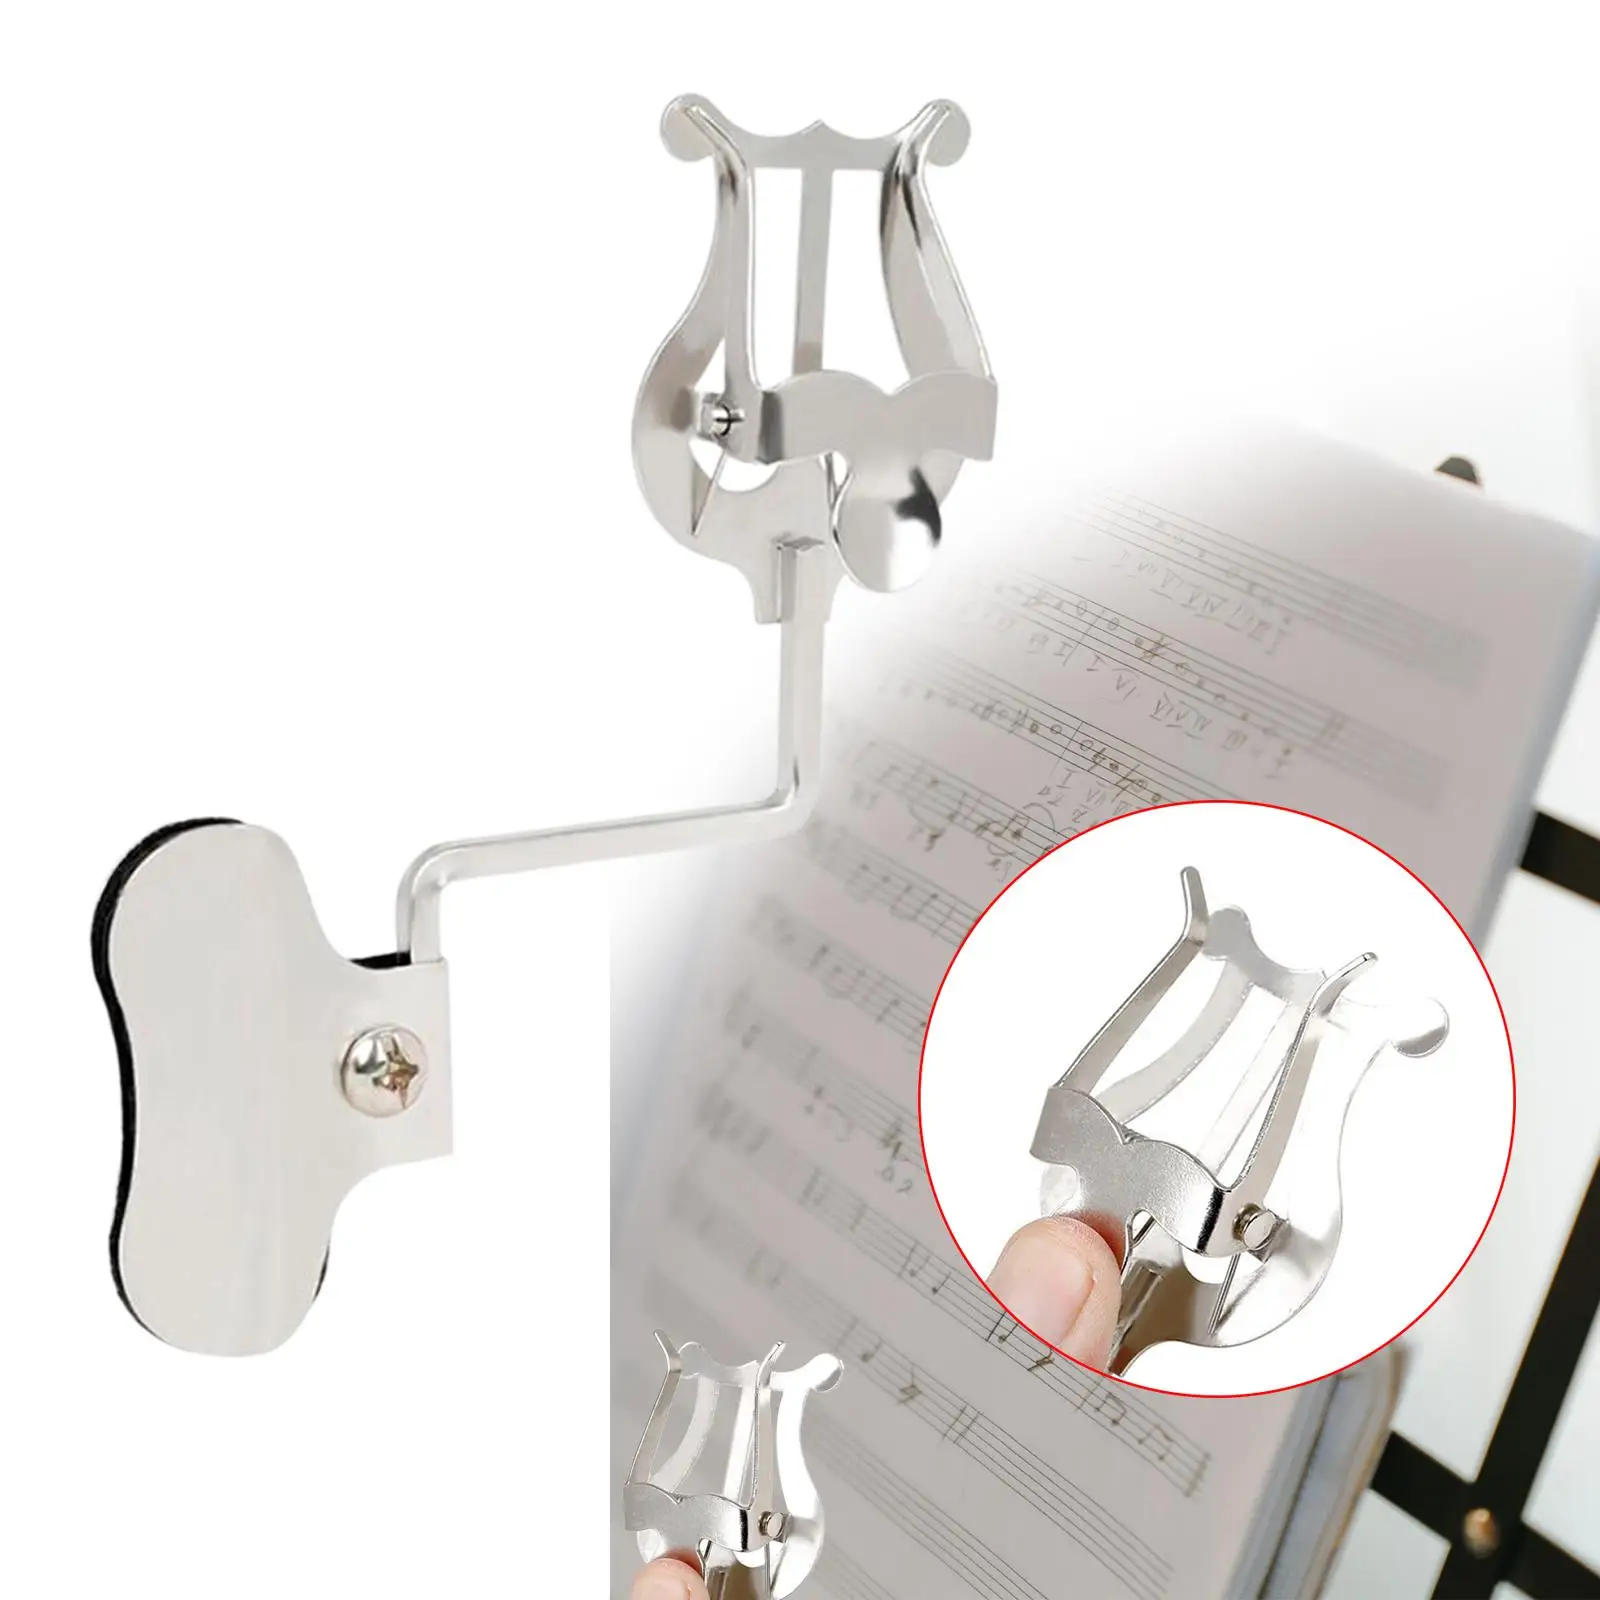 Trombone Music Clip Portable Trumpet Marching Clamp for Trumpet Daily Use Exercise Gift